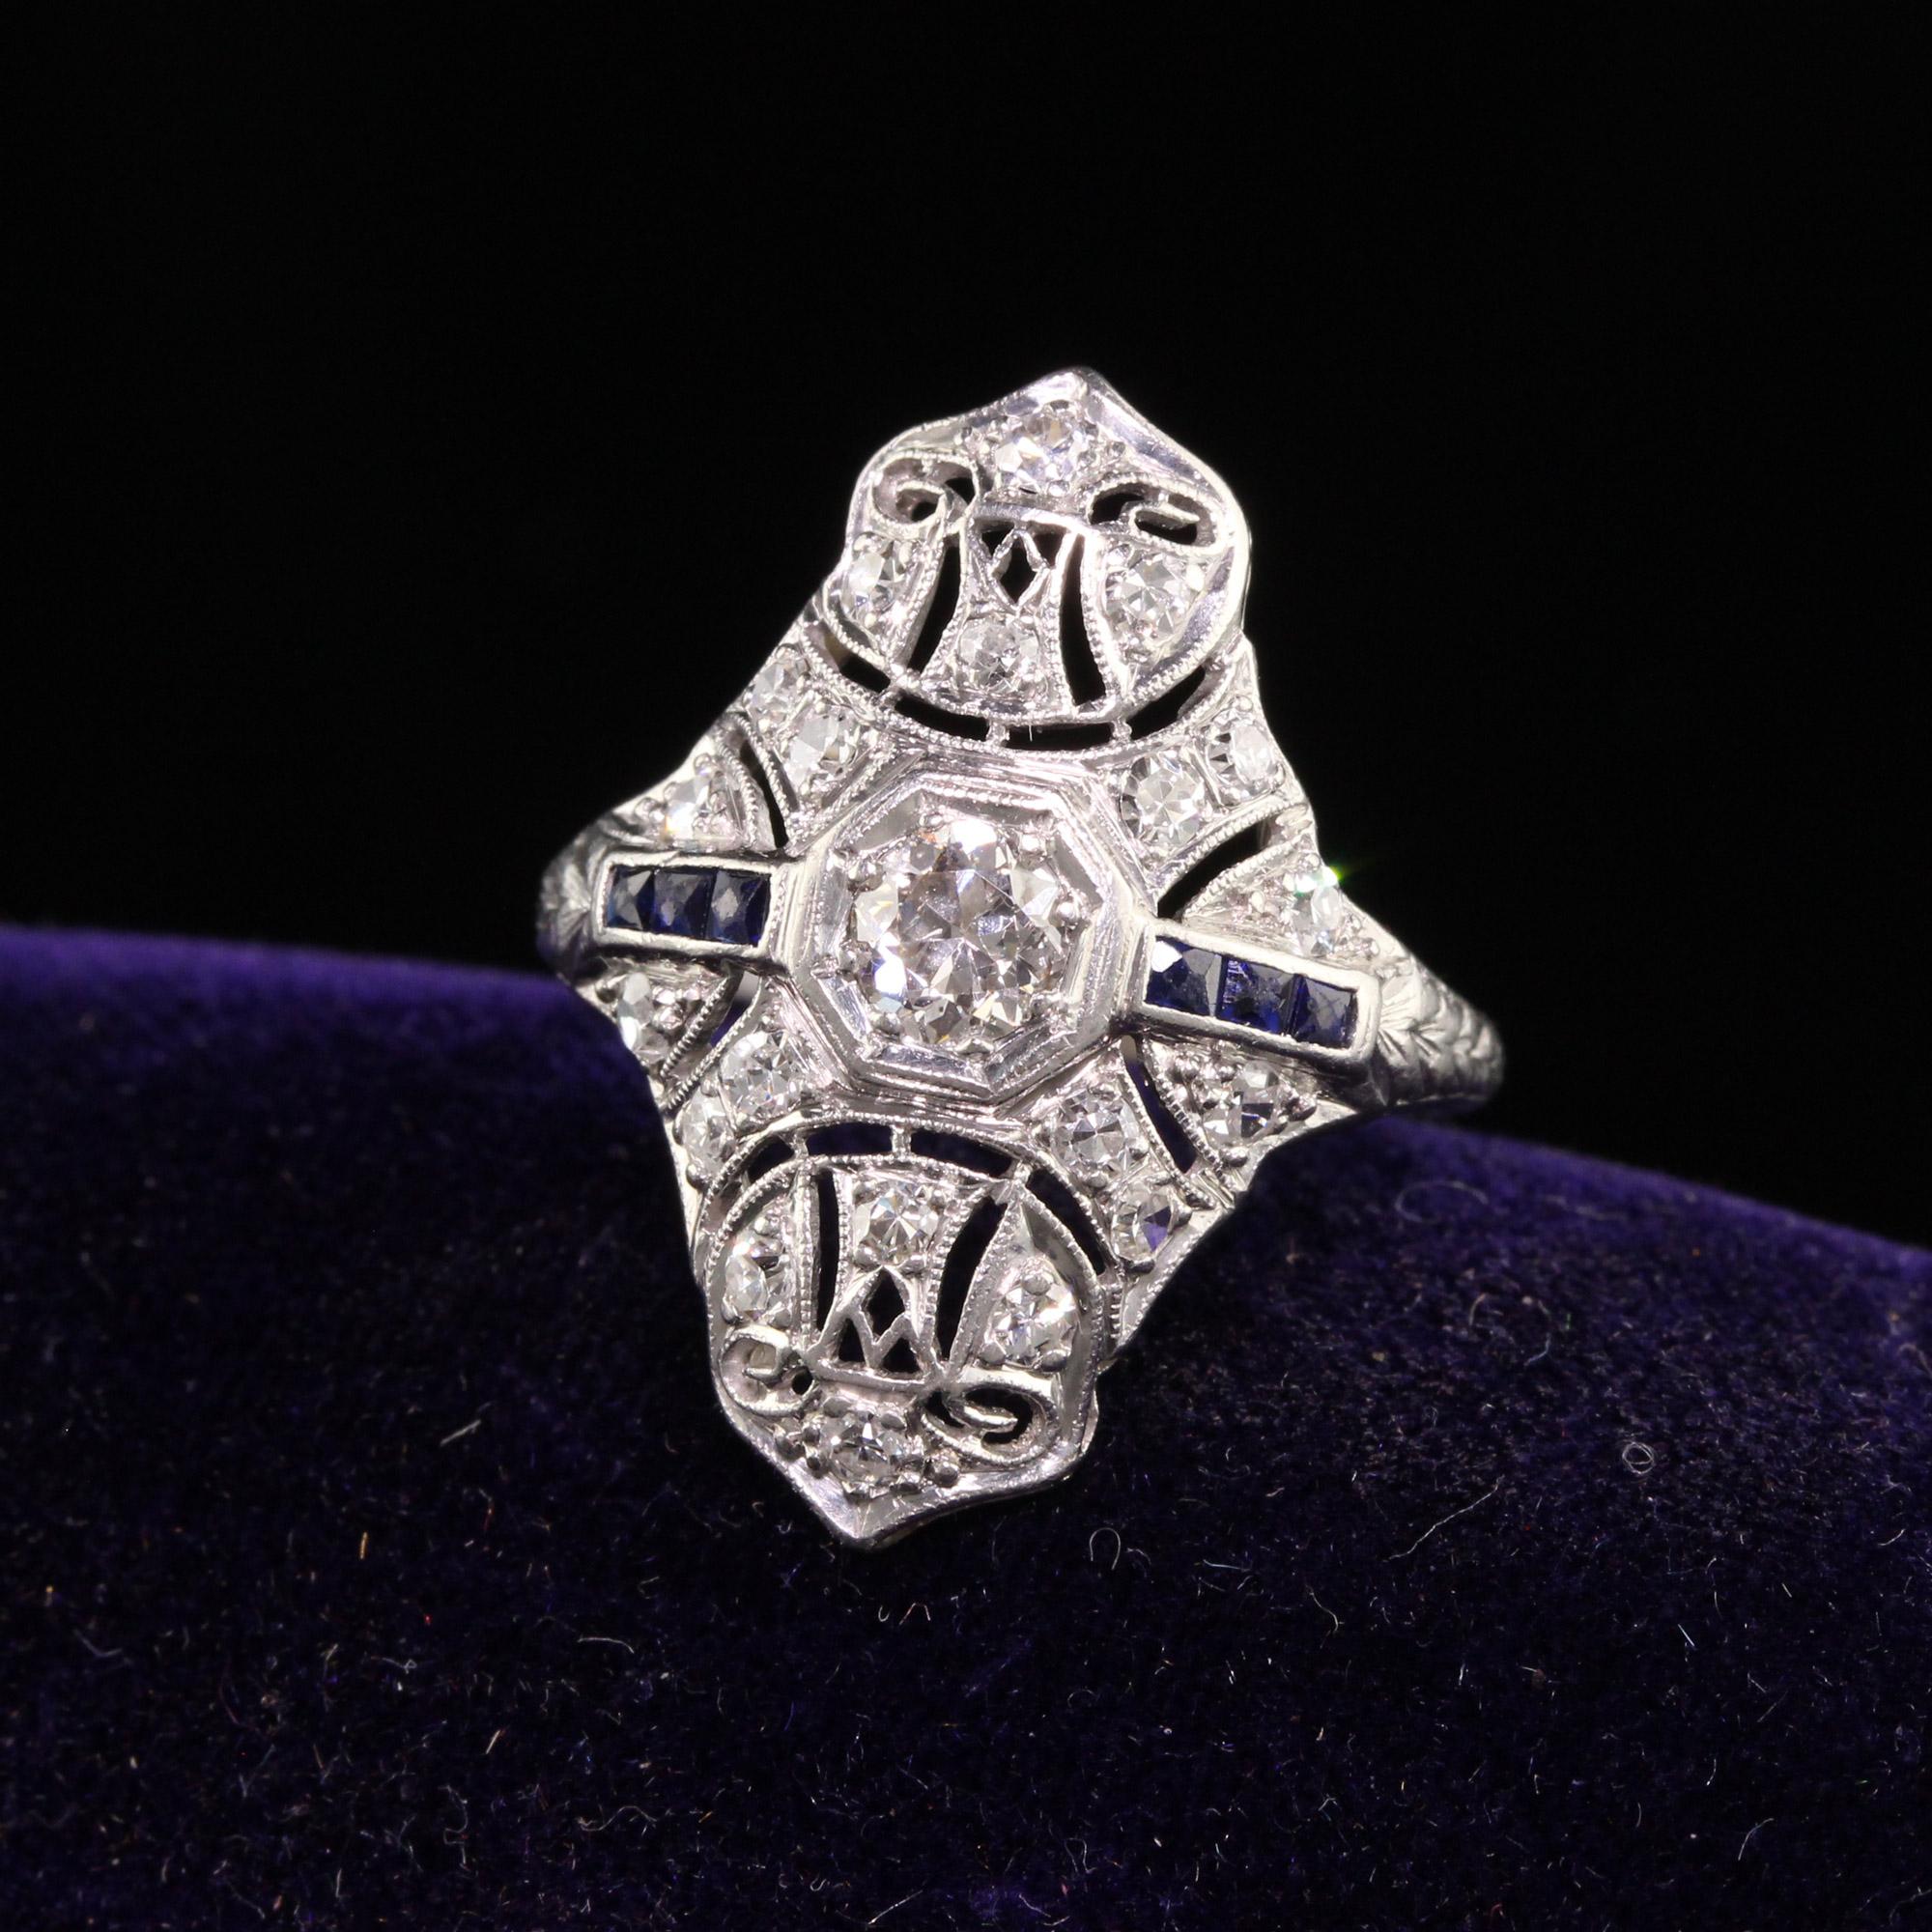 Beautiful Antique Art Deco Platinum Old European Cut Diamond Sapphire Shield Ring. This beautiful ring is crafted in platinum. The ring has old european cut diamonds set on the top with natural sapphires on both sides. The ring is in great condition